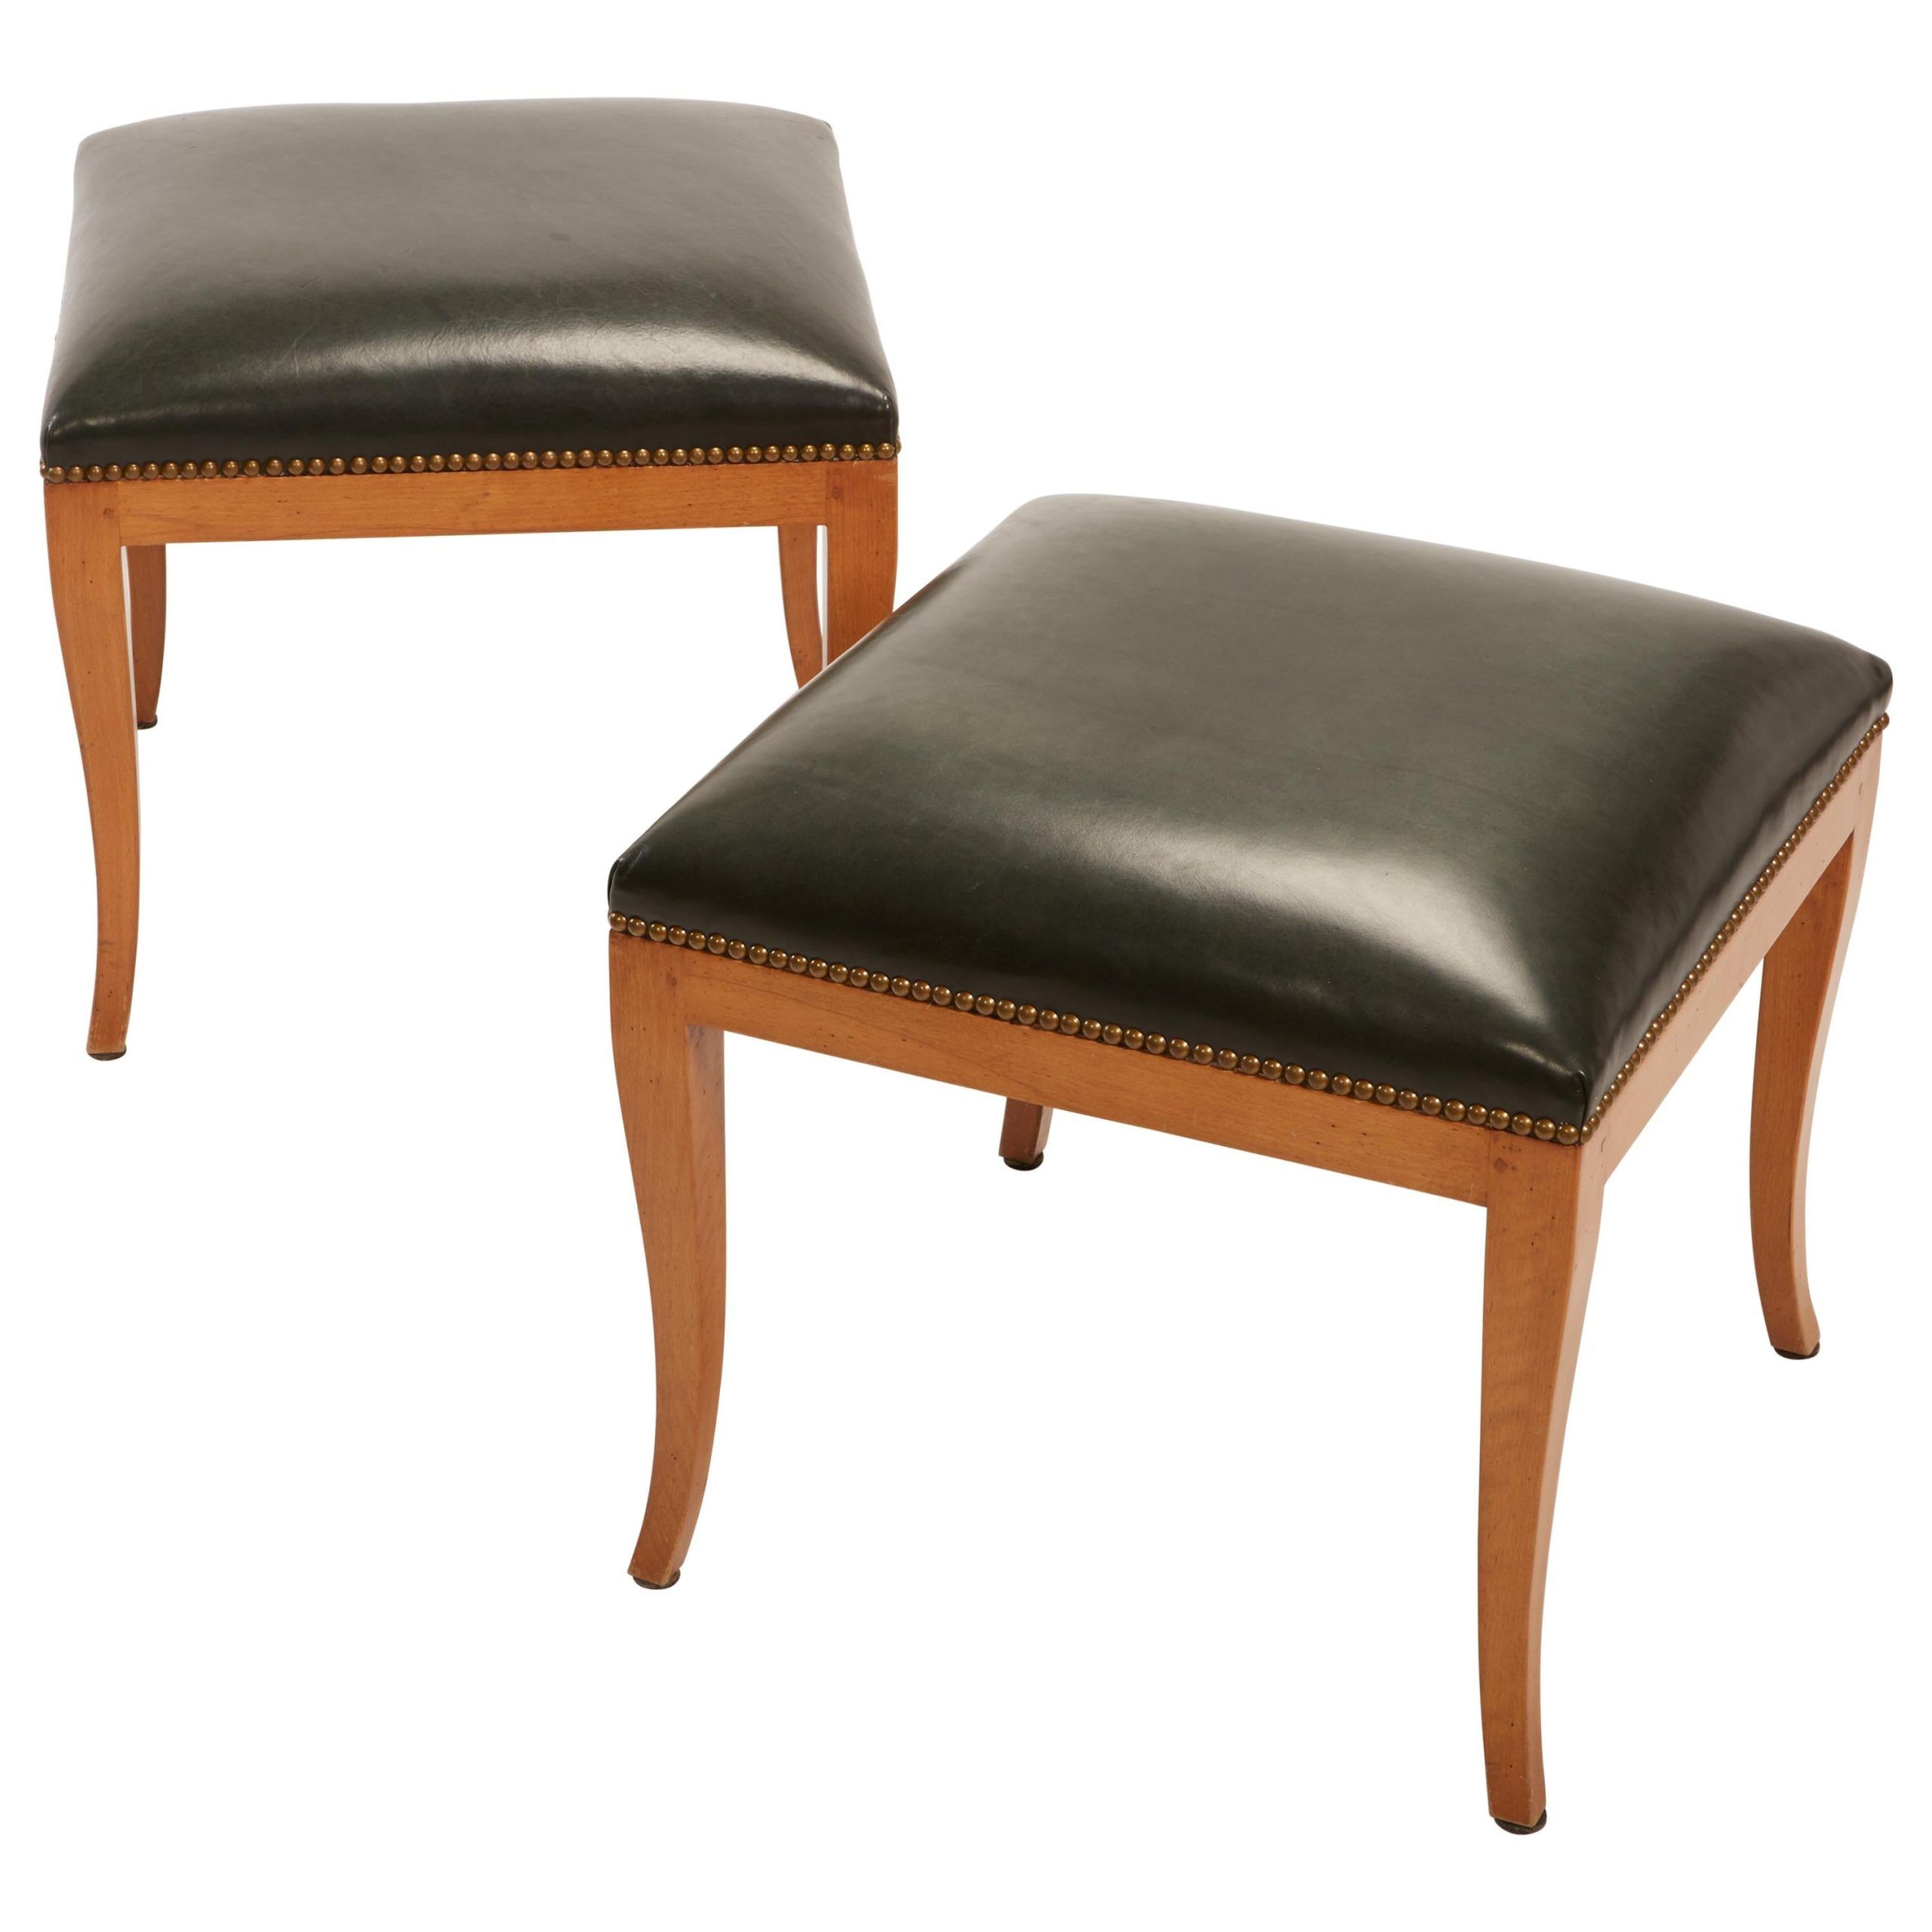 Pair Of Fruitwood Biedermeier Style Ottomans With Leather And Brass Tacks  For Sale At 1stdibs Within Antique Brass Ottomans (View 9 of 15)